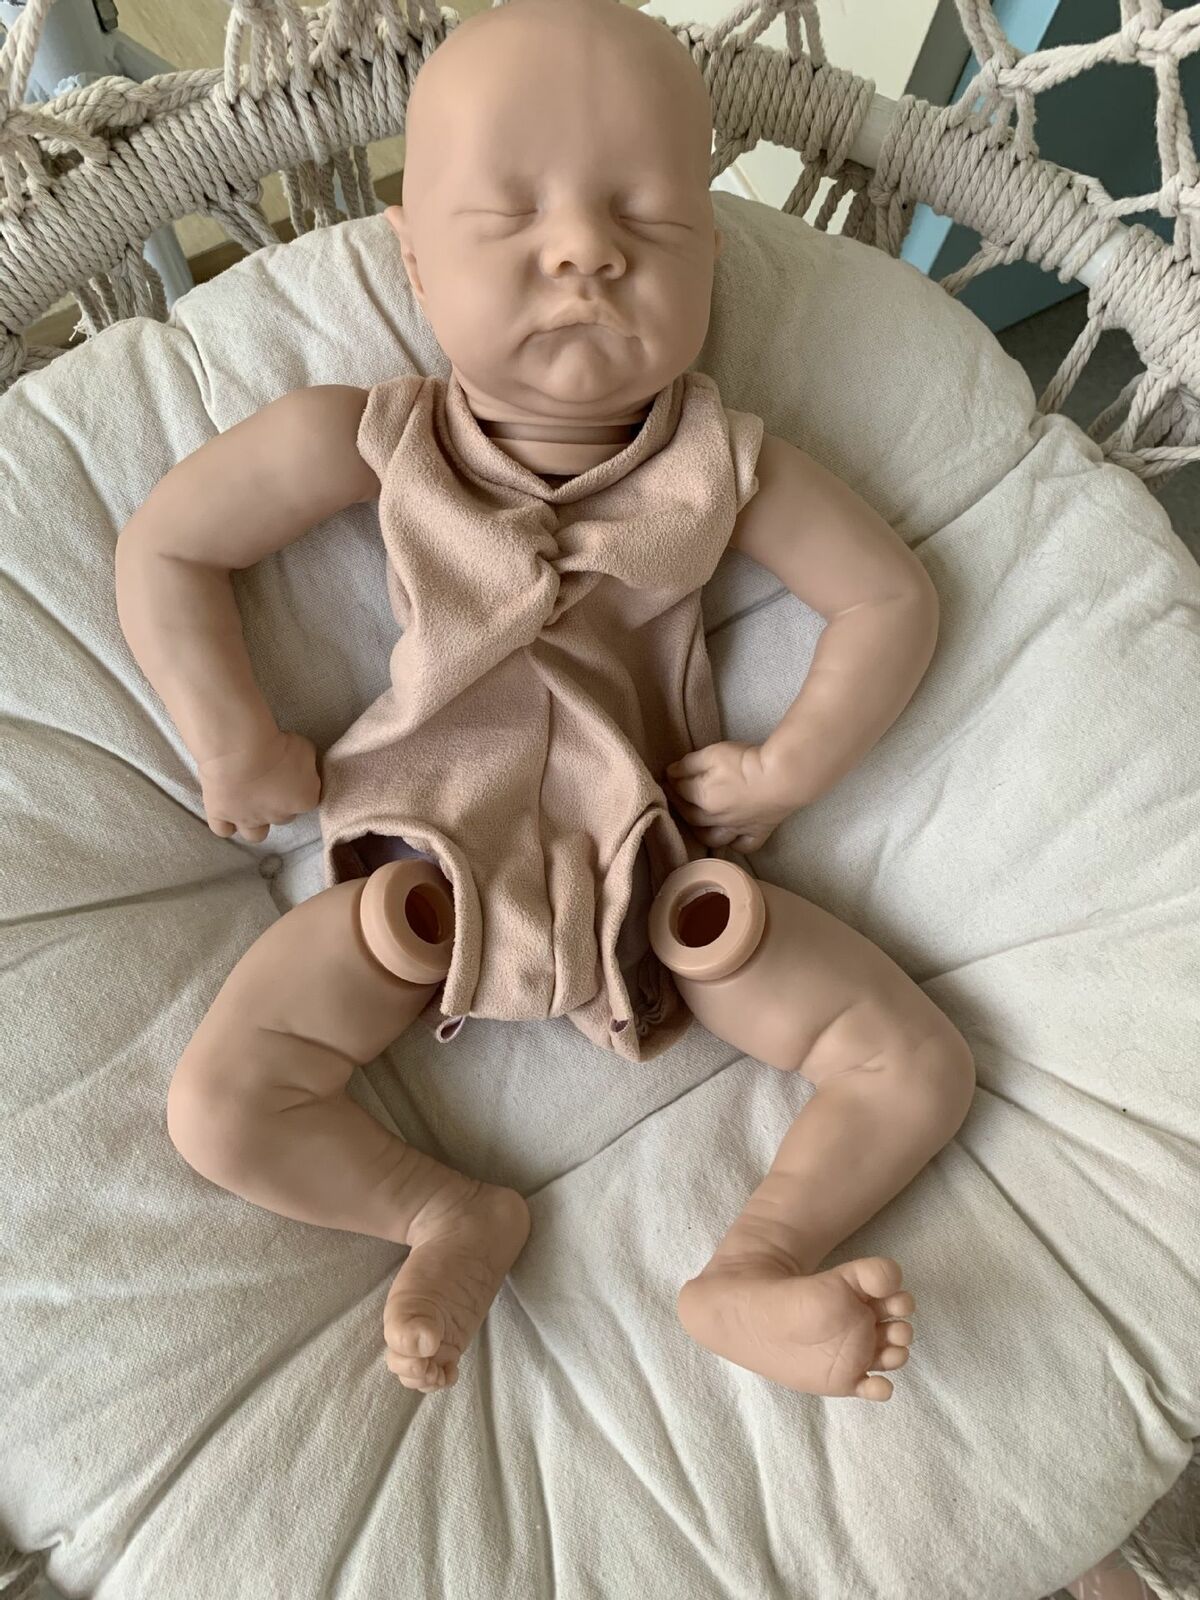 18in Reborn Doll Kit with Cloth Body Unpainted Sleeping Baby